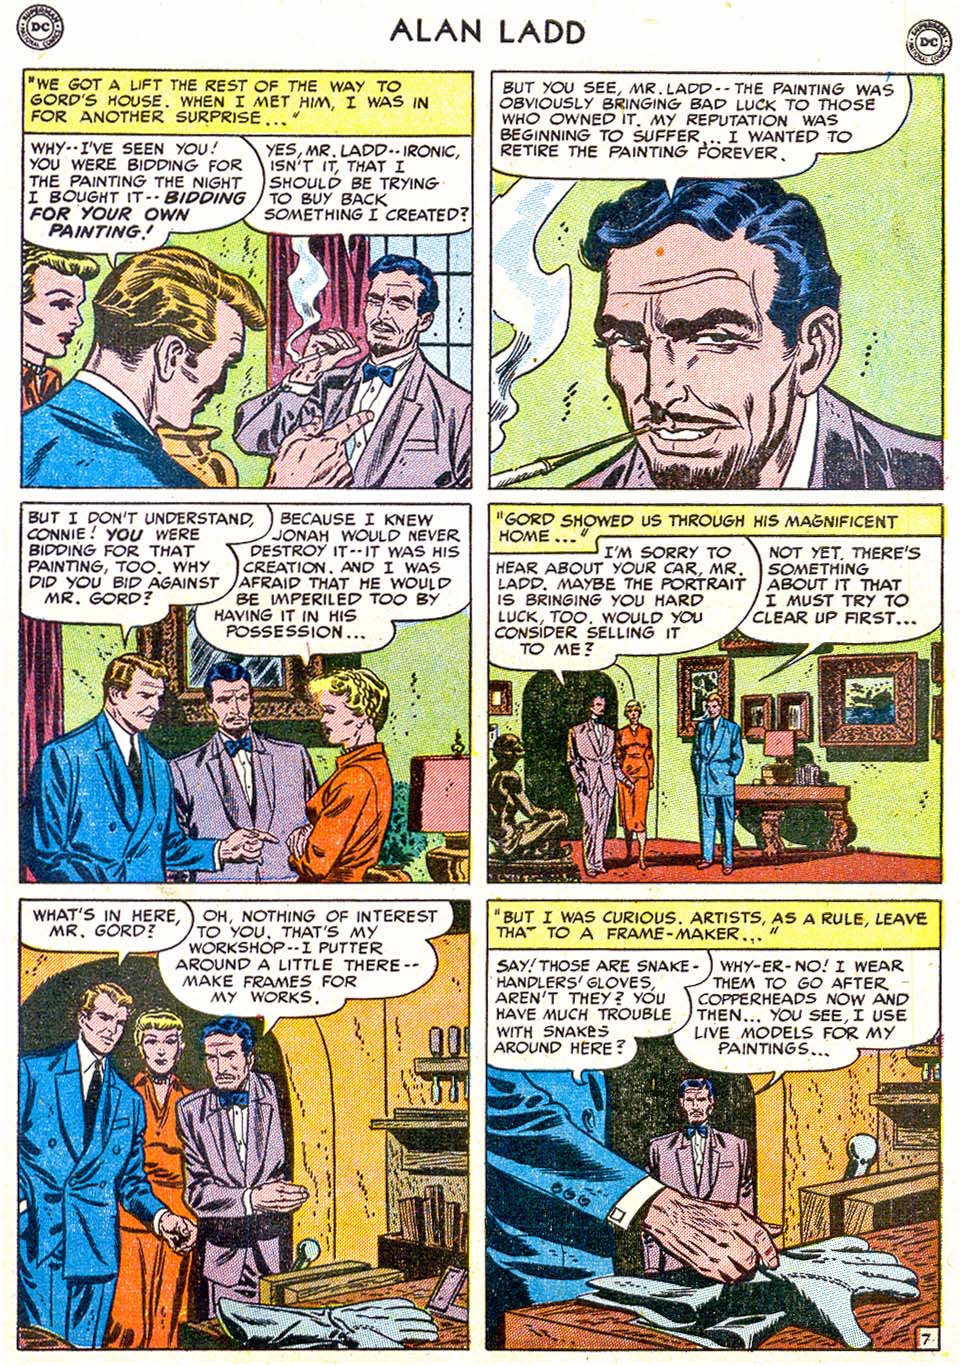 Read online Adventures of Alan Ladd comic -  Issue #6 - 9